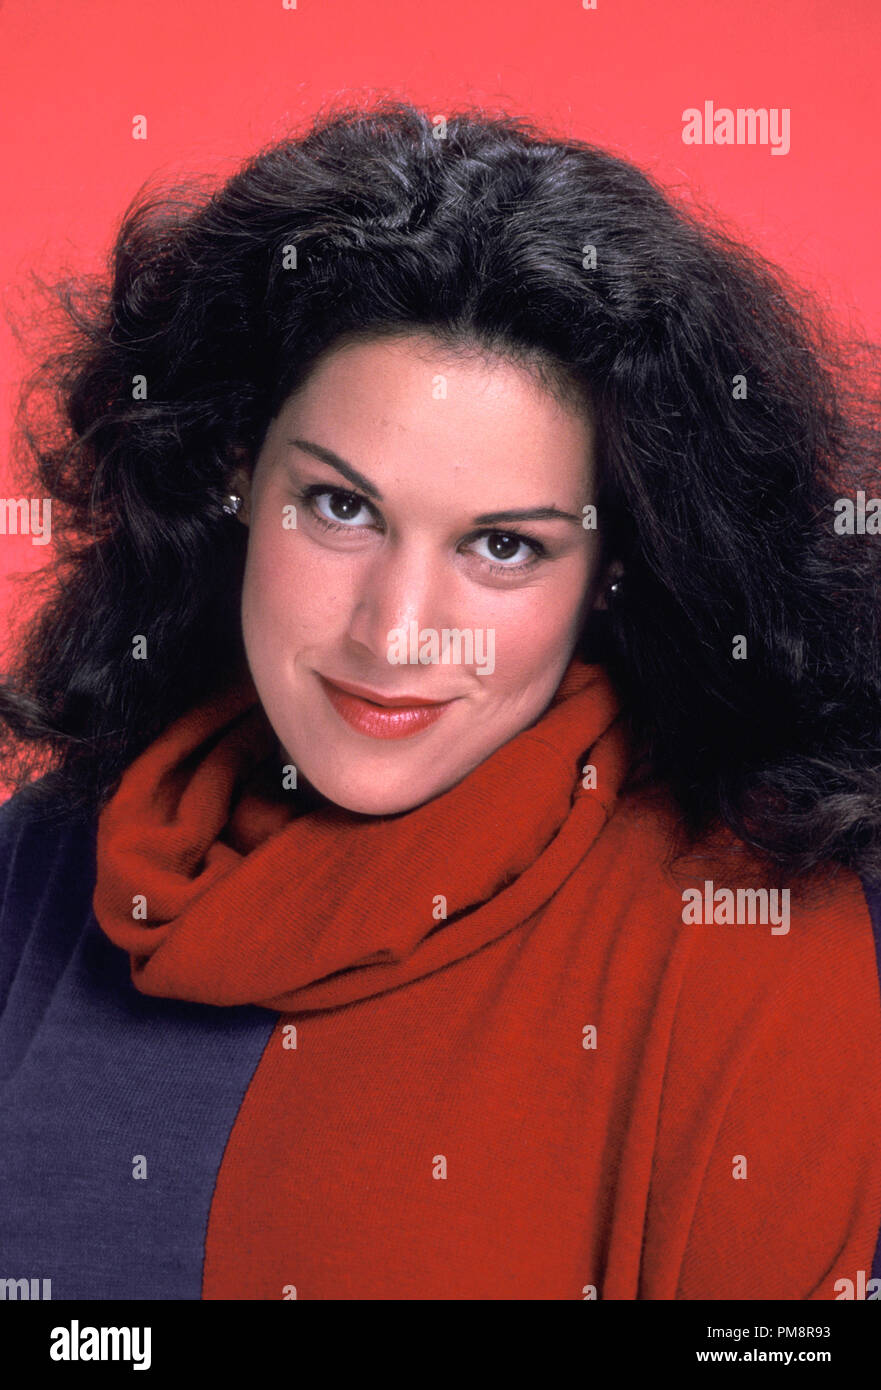 Studio Publicity Still from 'Bosom Buddies' Wendie Jo Sperber 1981   All Rights Reserved   File Reference # 31713181THA  For Editorial Use Only Stock Photo